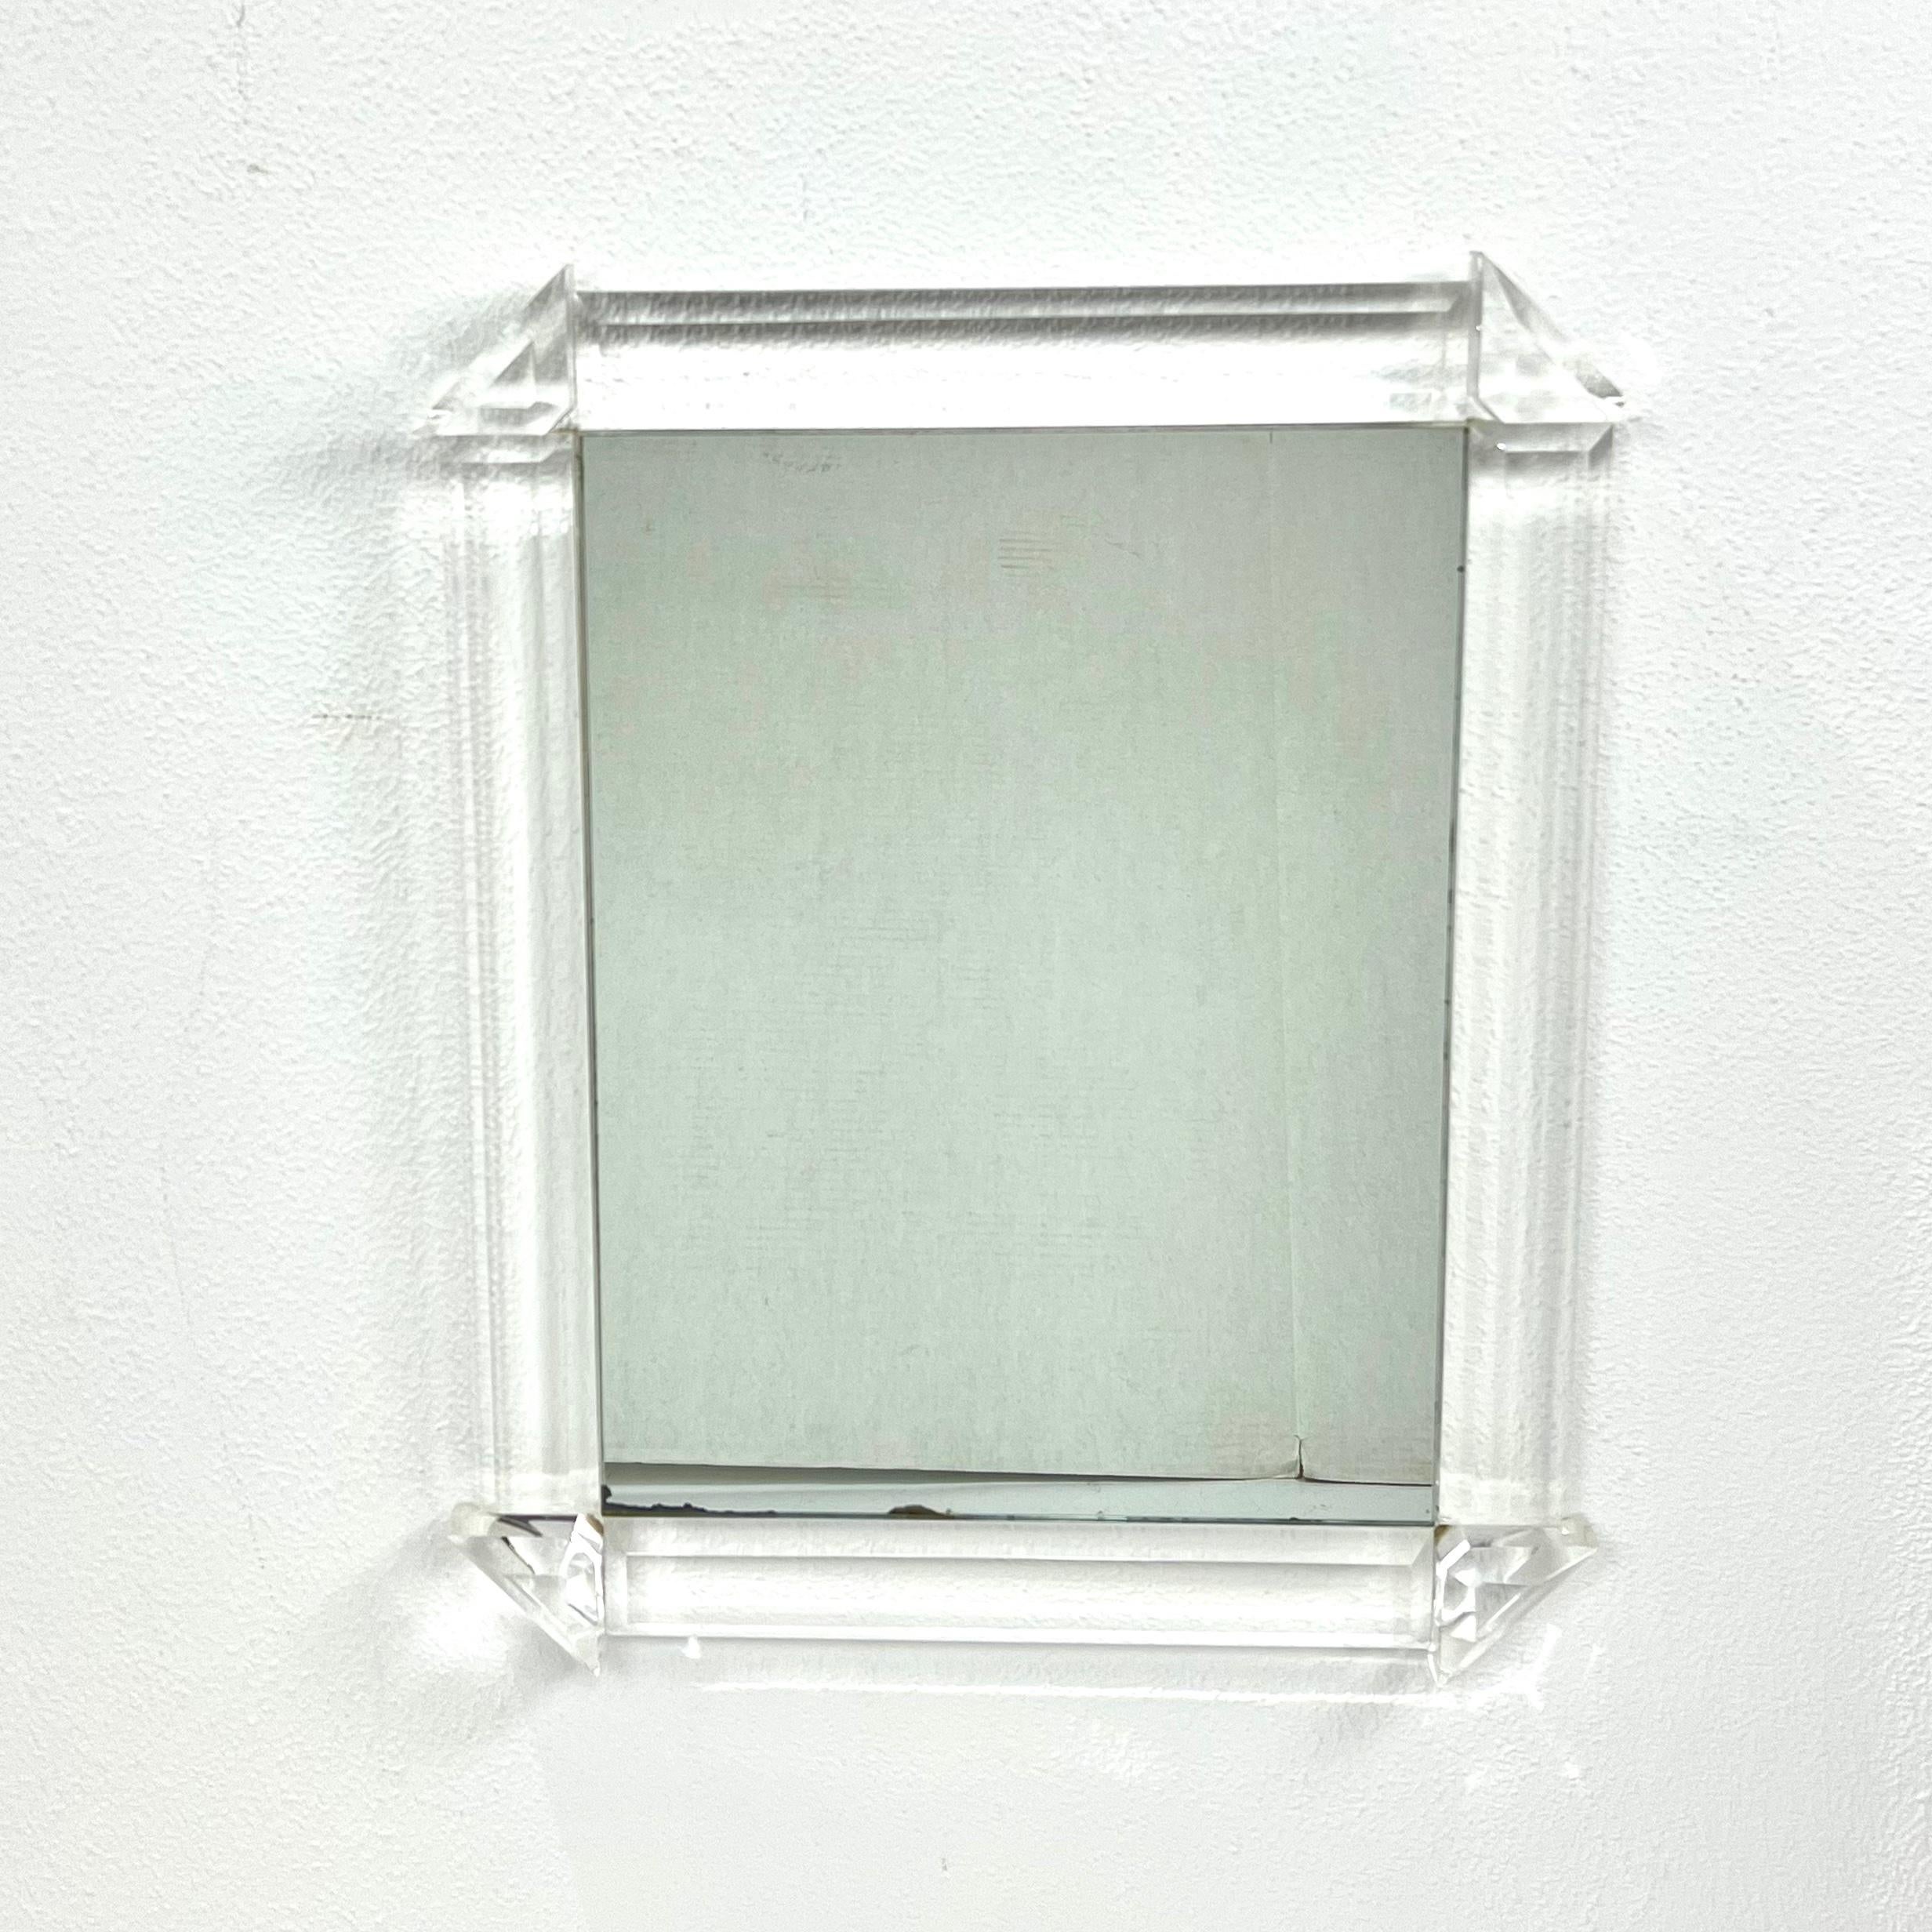 Stunning 1970s faceted lucite wall mirror in the style of Karl Springer. Crystal clear lucite frame in very good condition. Solid, heavy, and totally unique! Lucite frame in very good condition - no discoloration. Mirror shows some minor